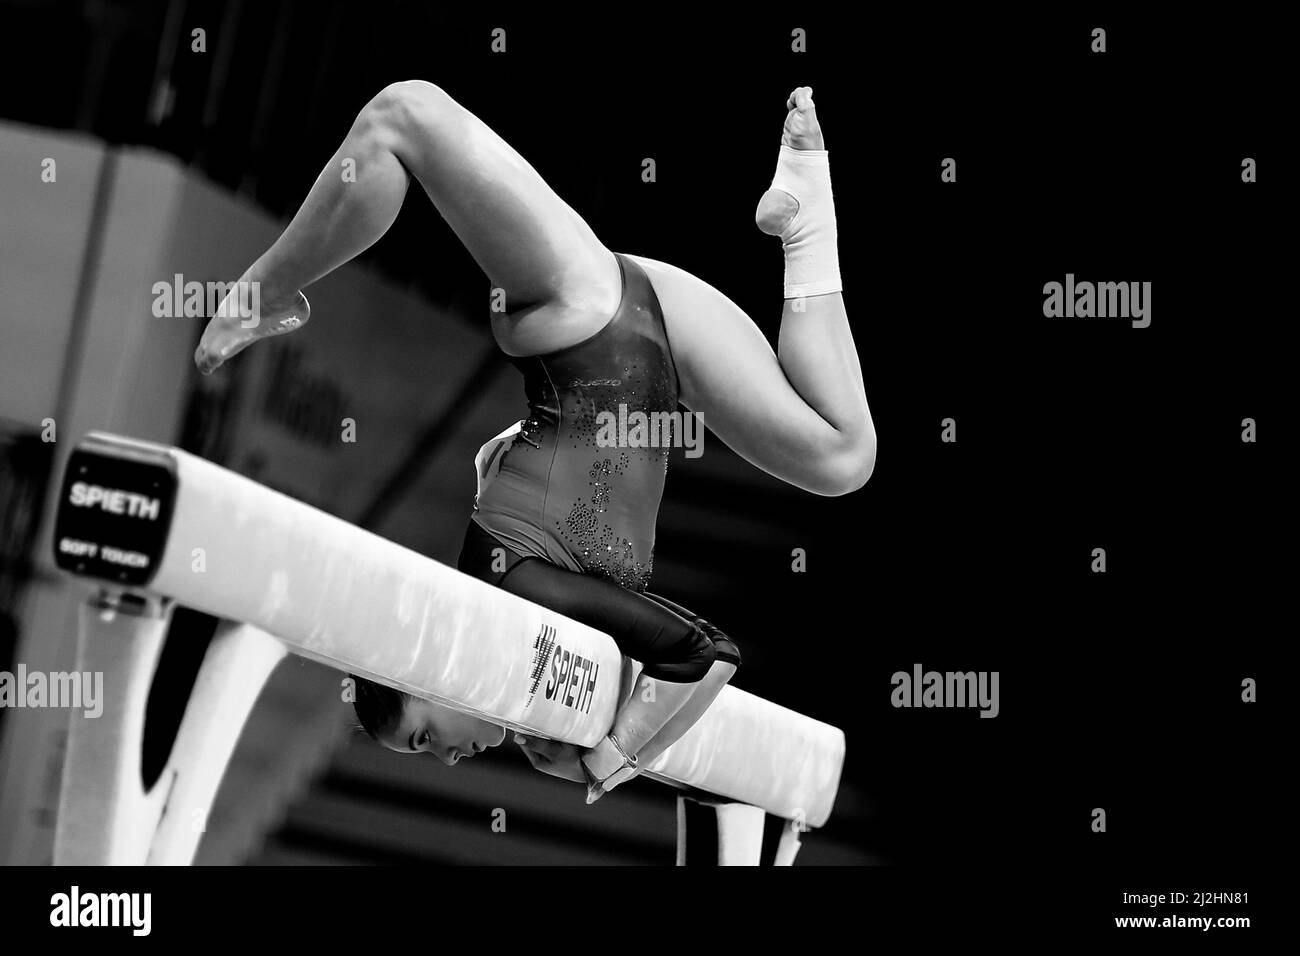 2028 olympic games Black and White Stock Photos & Images - Alamy